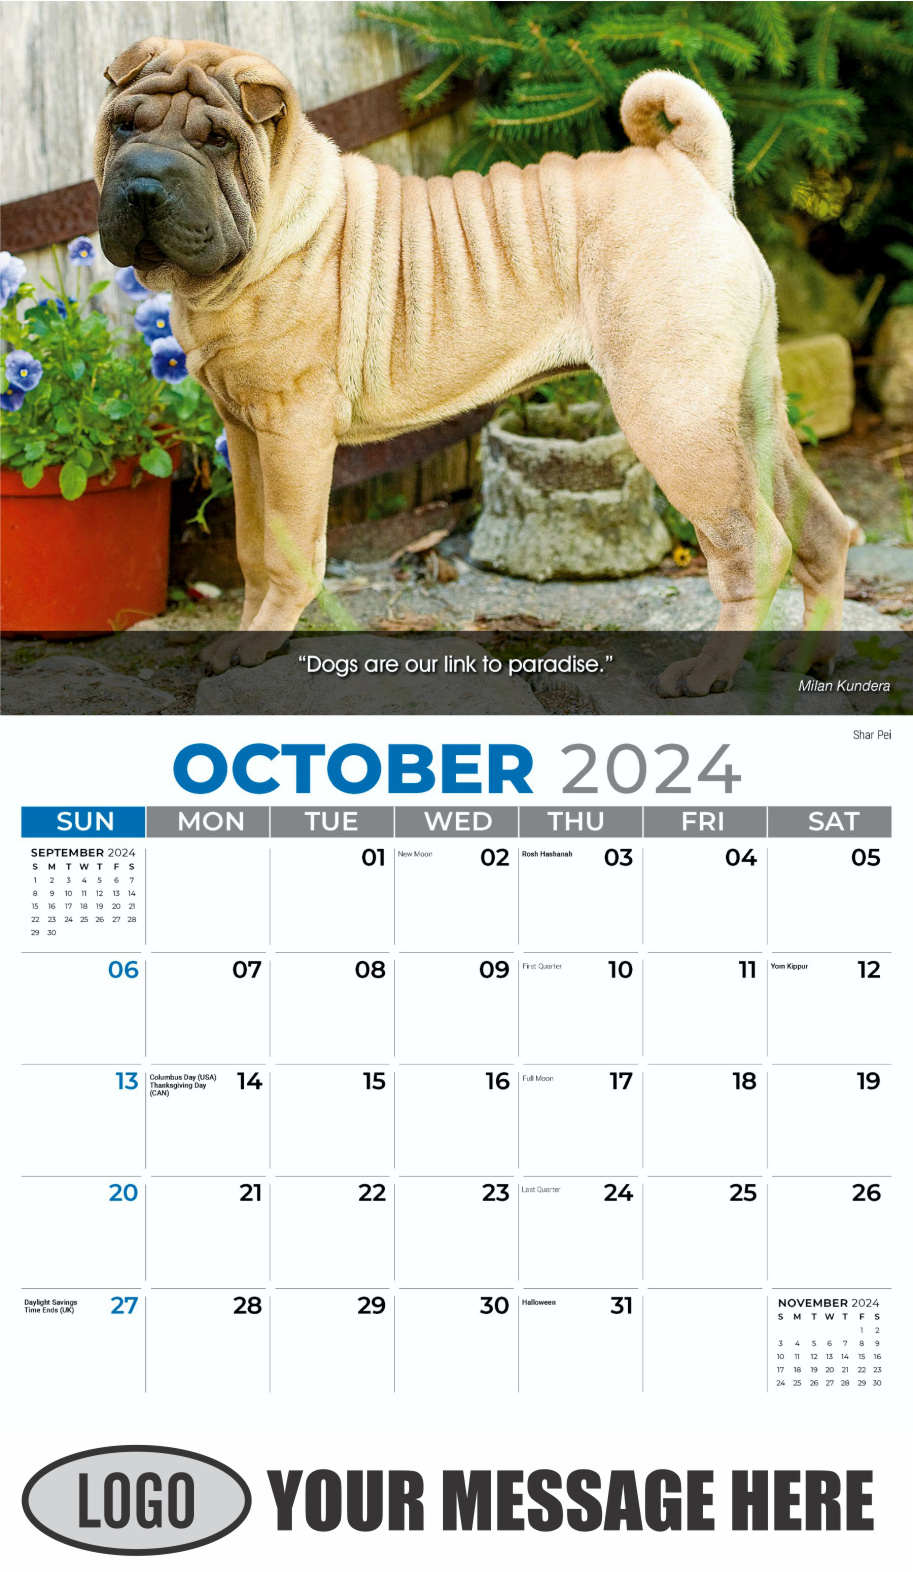 Dogs 2024 Vets and Pets Business Promotion Calendar - October